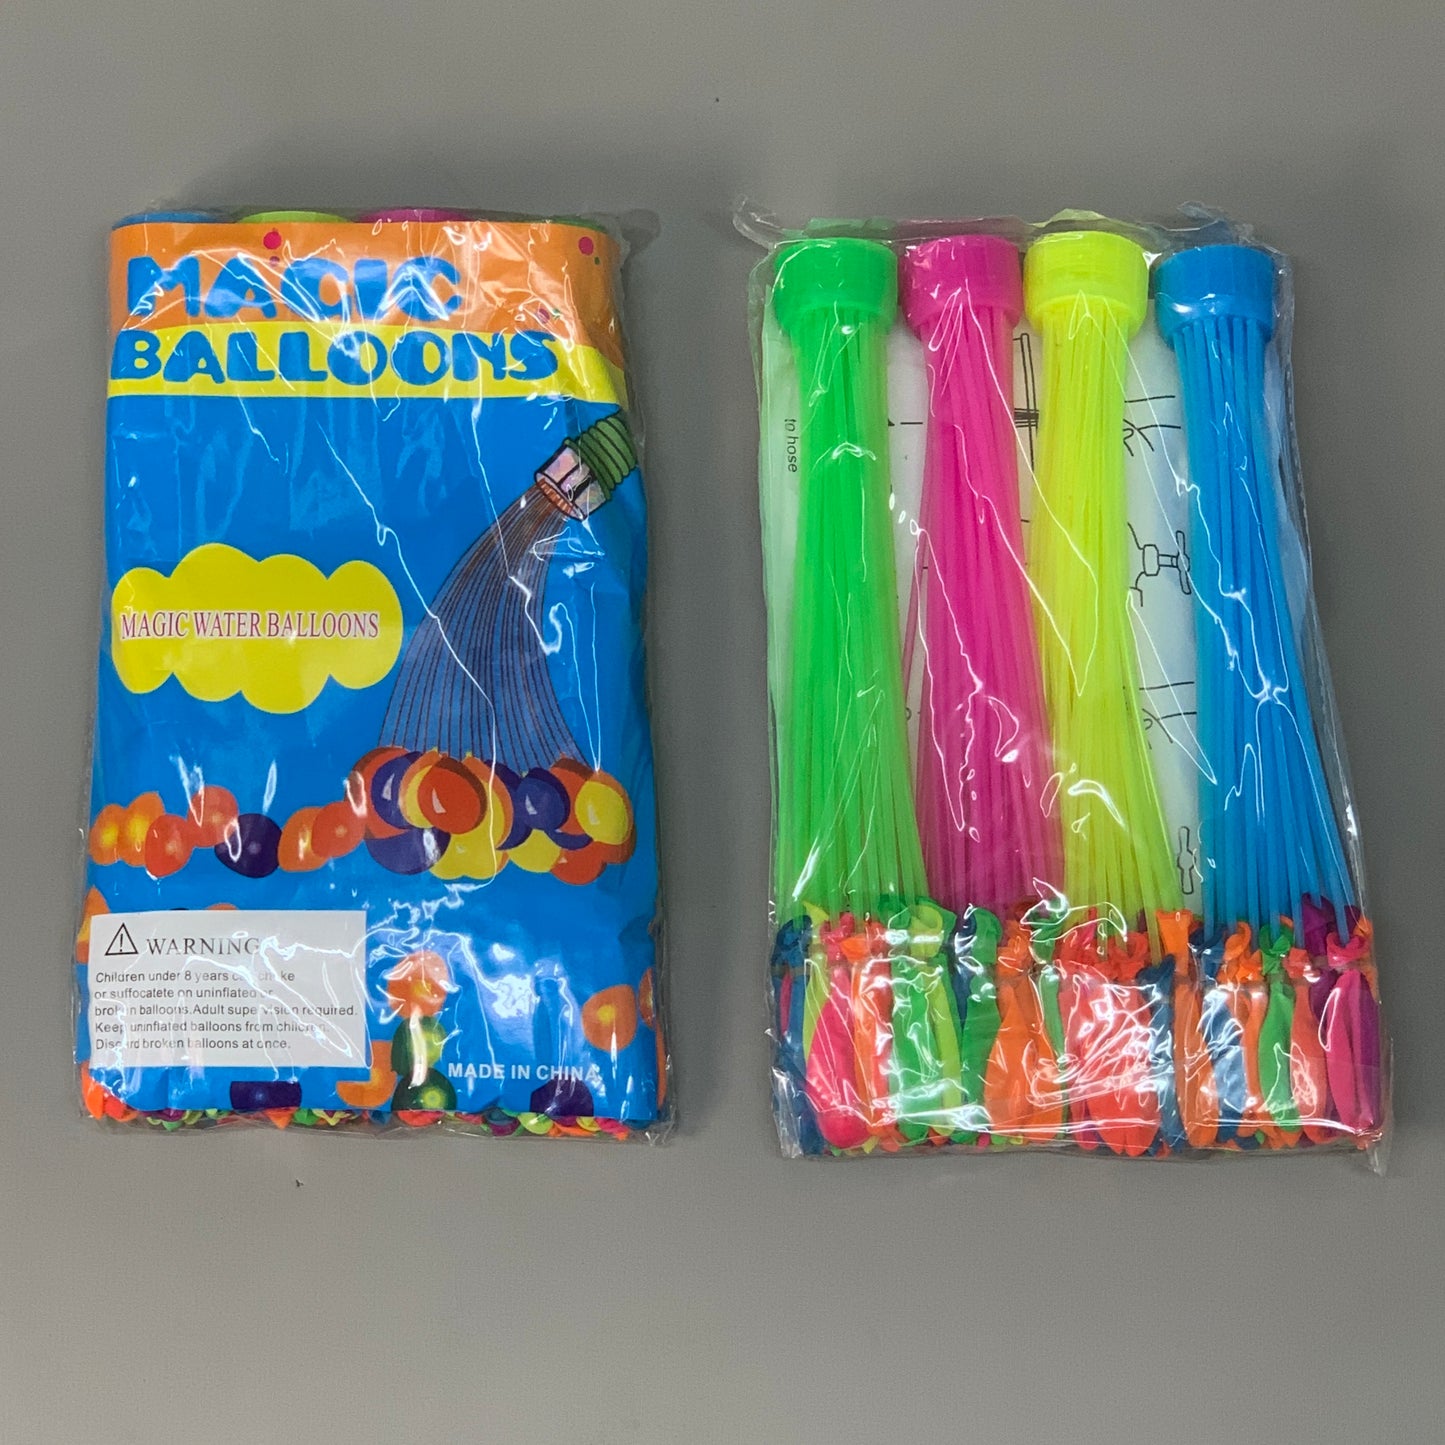 MAGIC BALLOONS 4 PACKS of 4! (592 Balloons) Instant Self-Tie, Self-Seal Balloons (New)